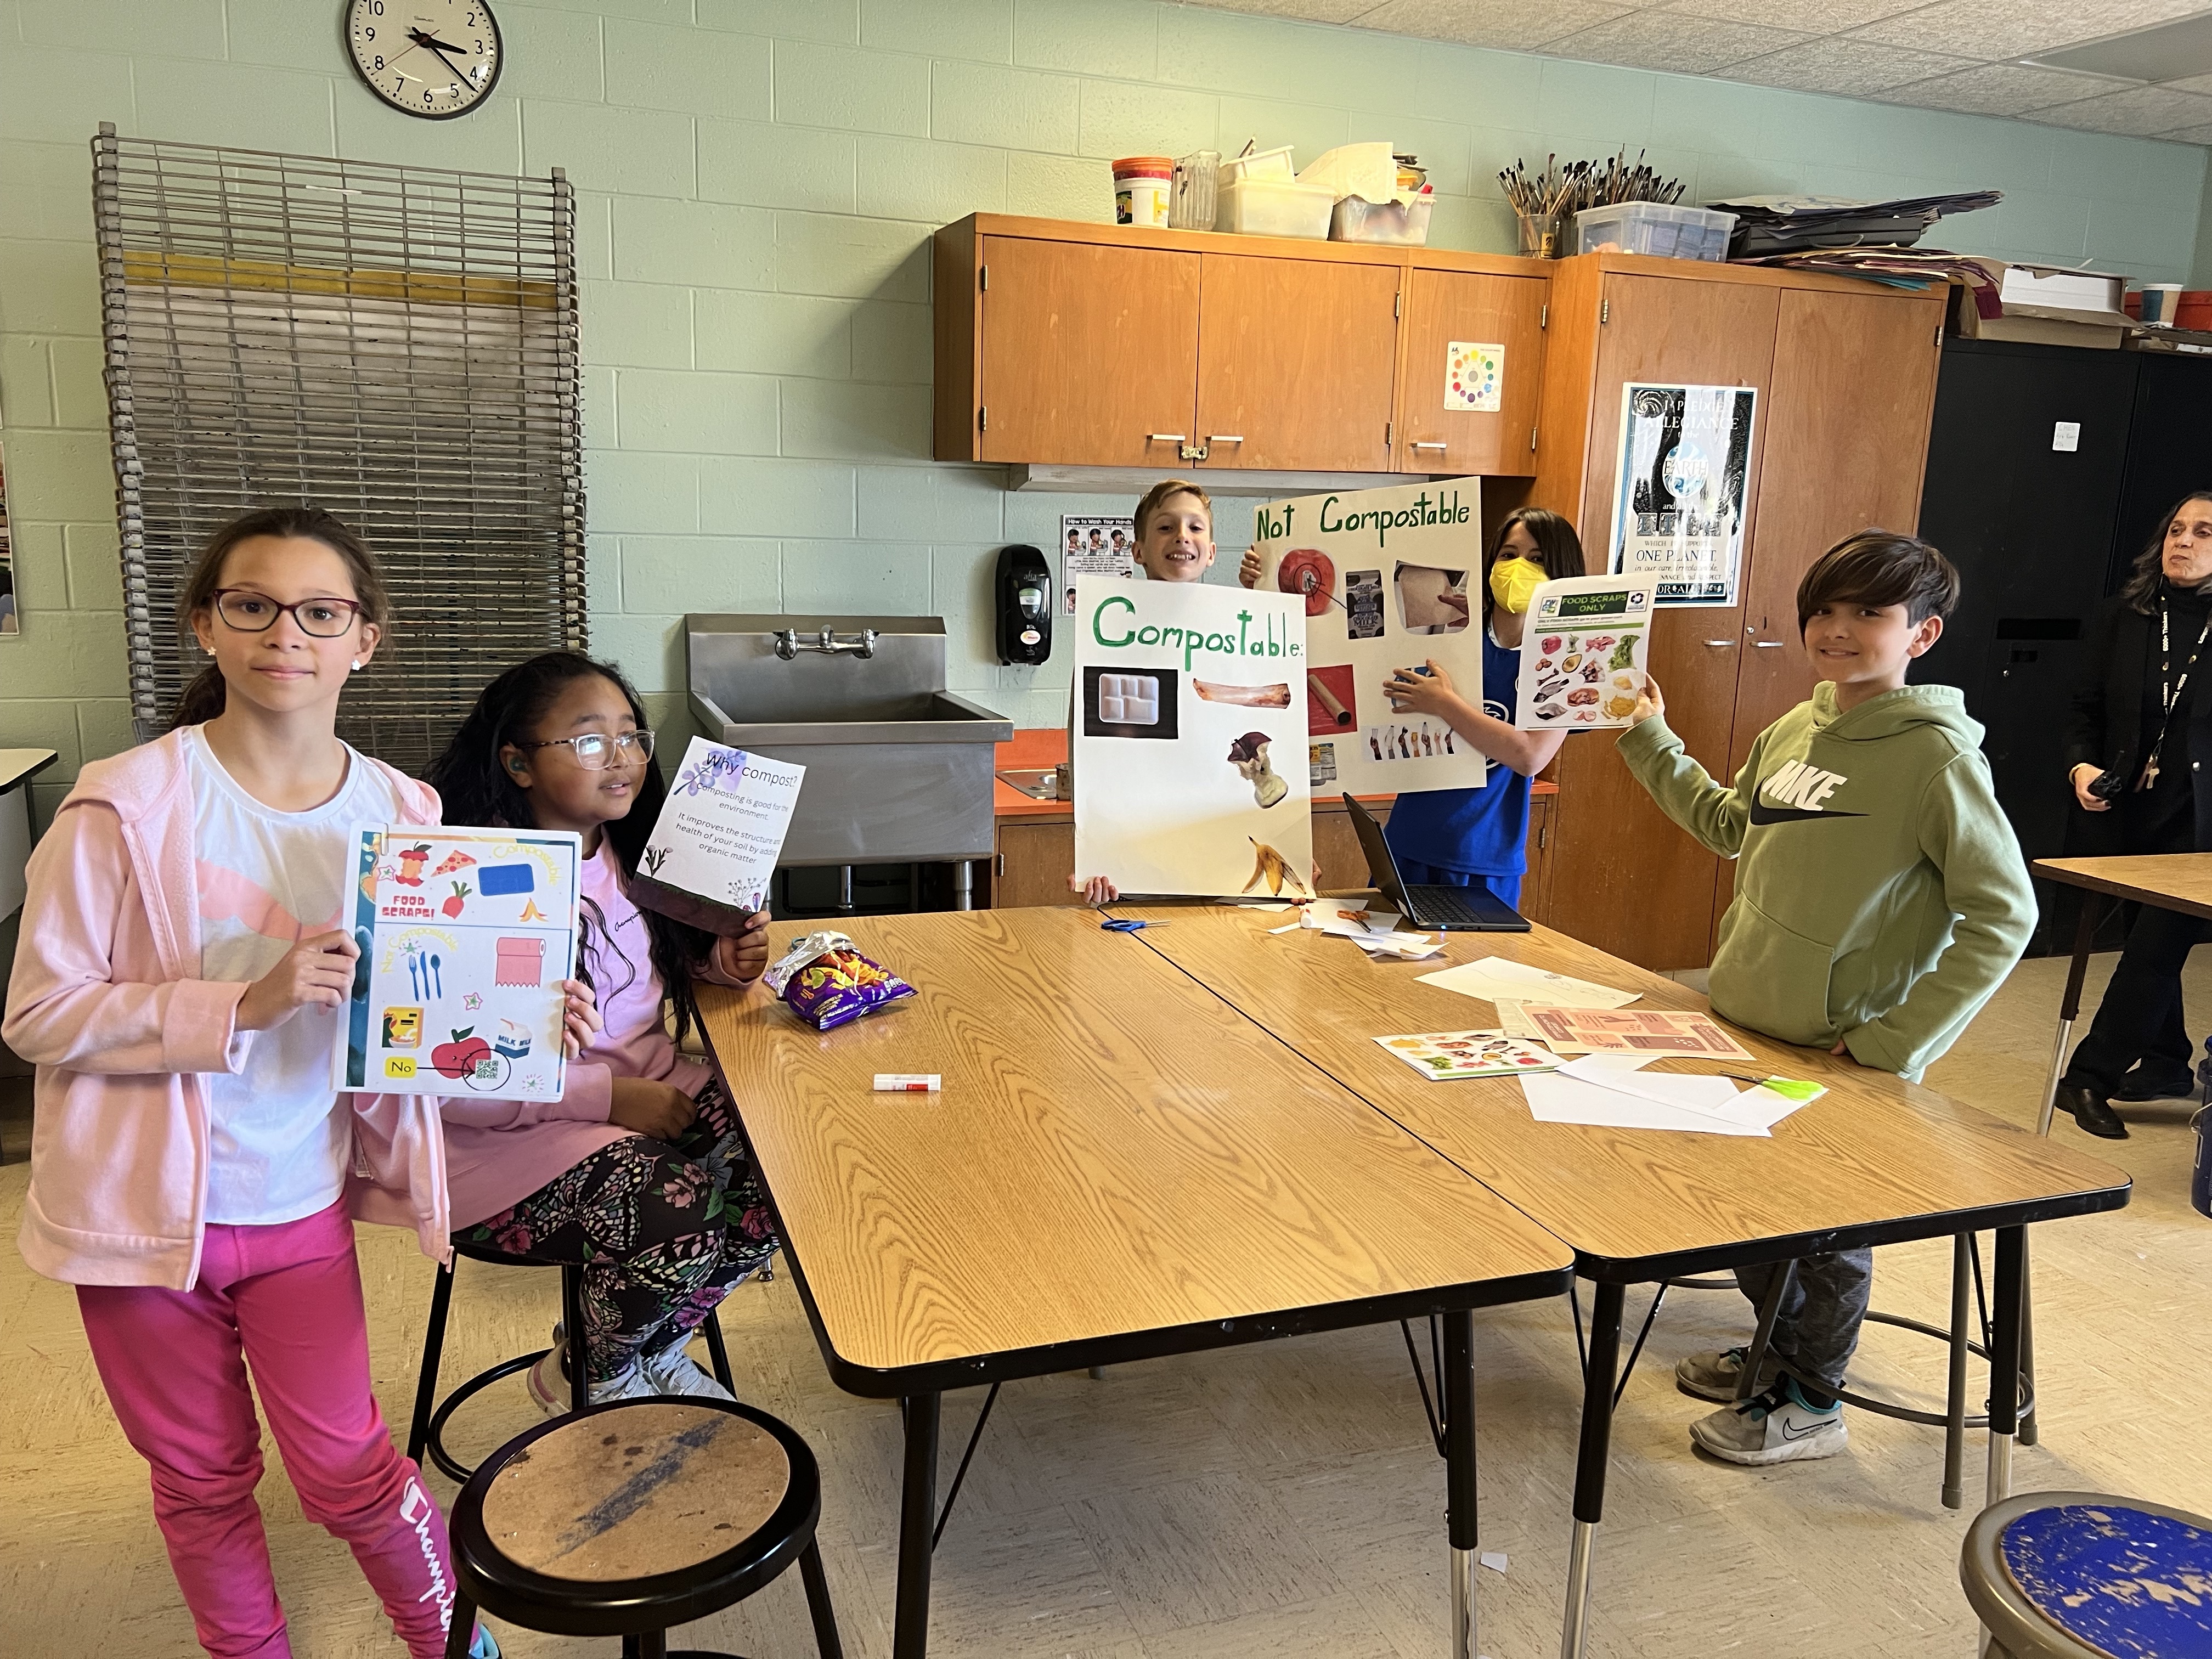 fifth grade student council members with posters and flyers